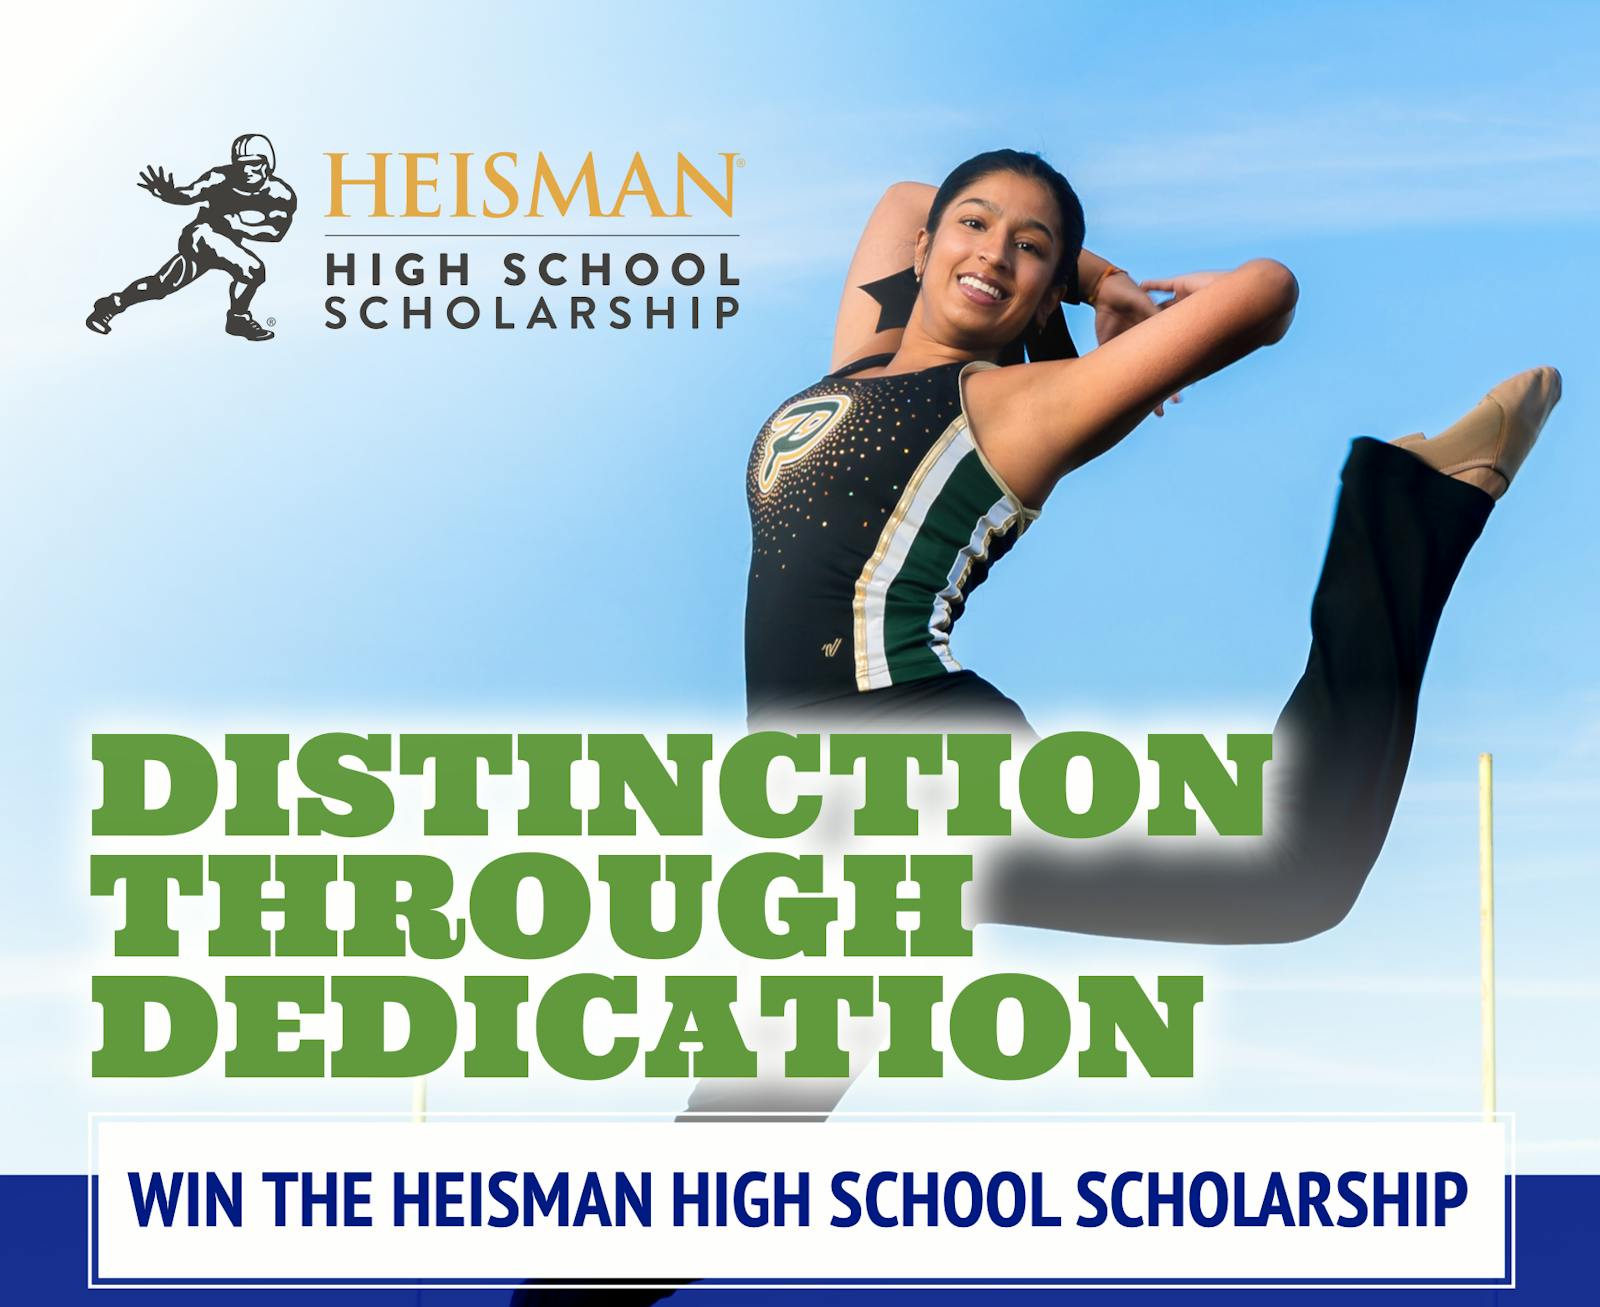 is there an essay for the heisman high school scholarship